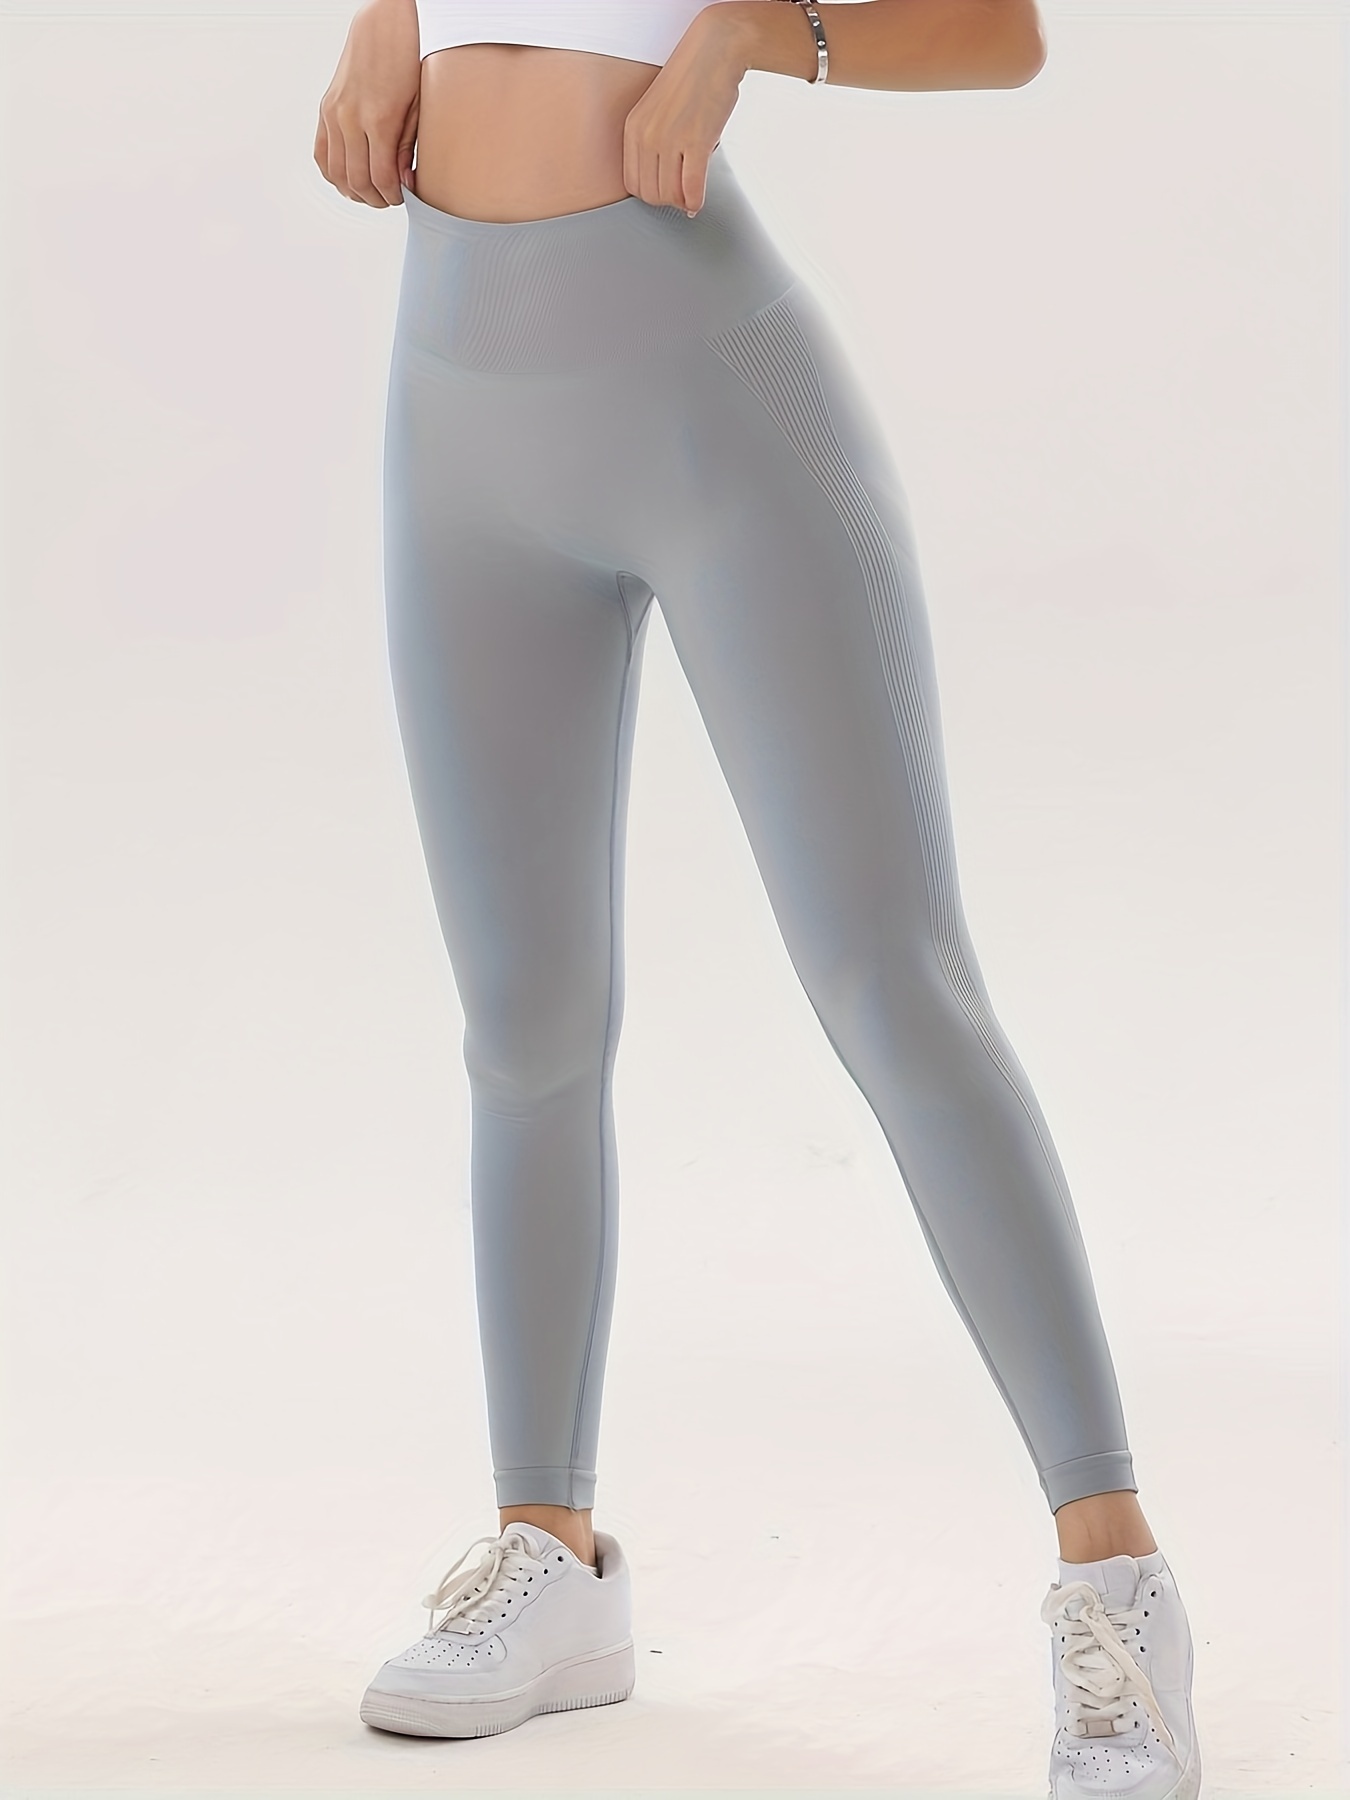 Light Grey Color Yoga Leggings, Solid Color Gray Women's Long Tights-Made  in USA/EU/MX